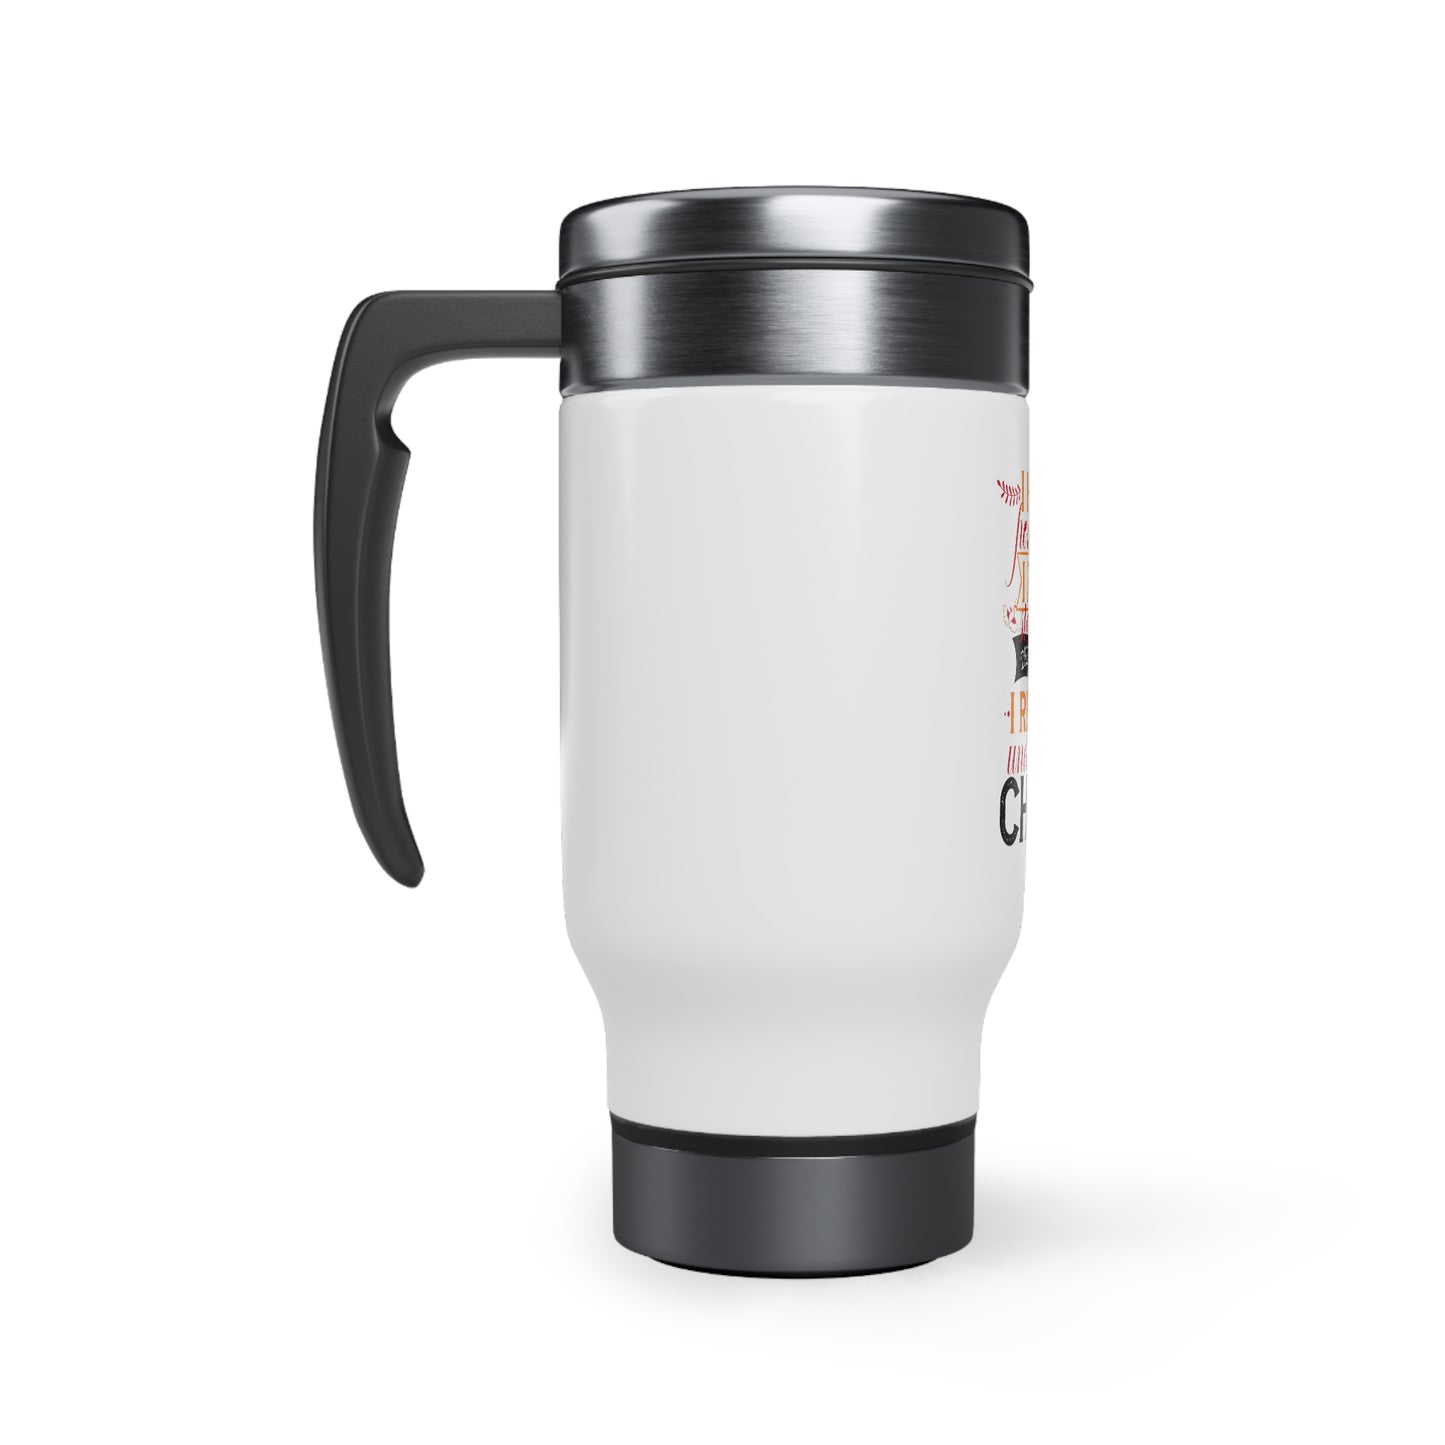 I Have Persevered I Have Stayed The Course I Remain Undefeated In Christ Travel Mug with Handle, 14oz